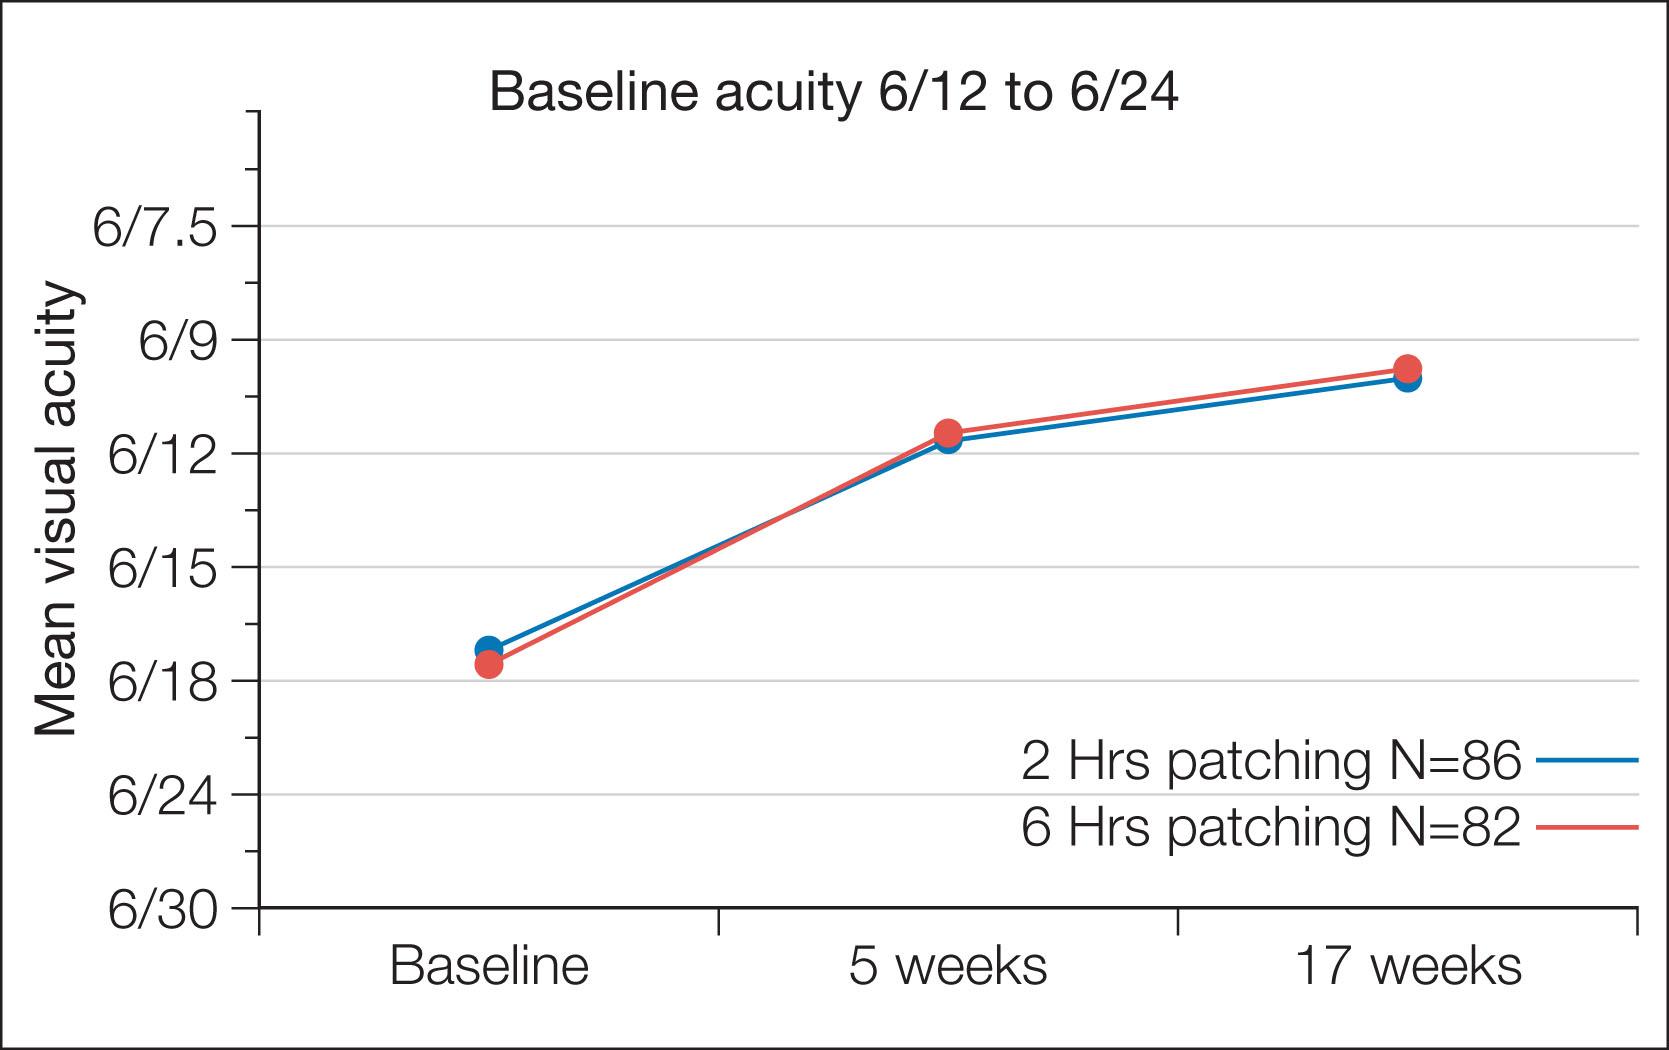 Fig. 74.2, Occlusion dosage of 2 versus 6 hours compared in a randomized controlled trial. 45 No increase in therapy was allowed by the protocol. There was no difference in the rate or magnitude of improvement during the 4 months of prescribed treatment.